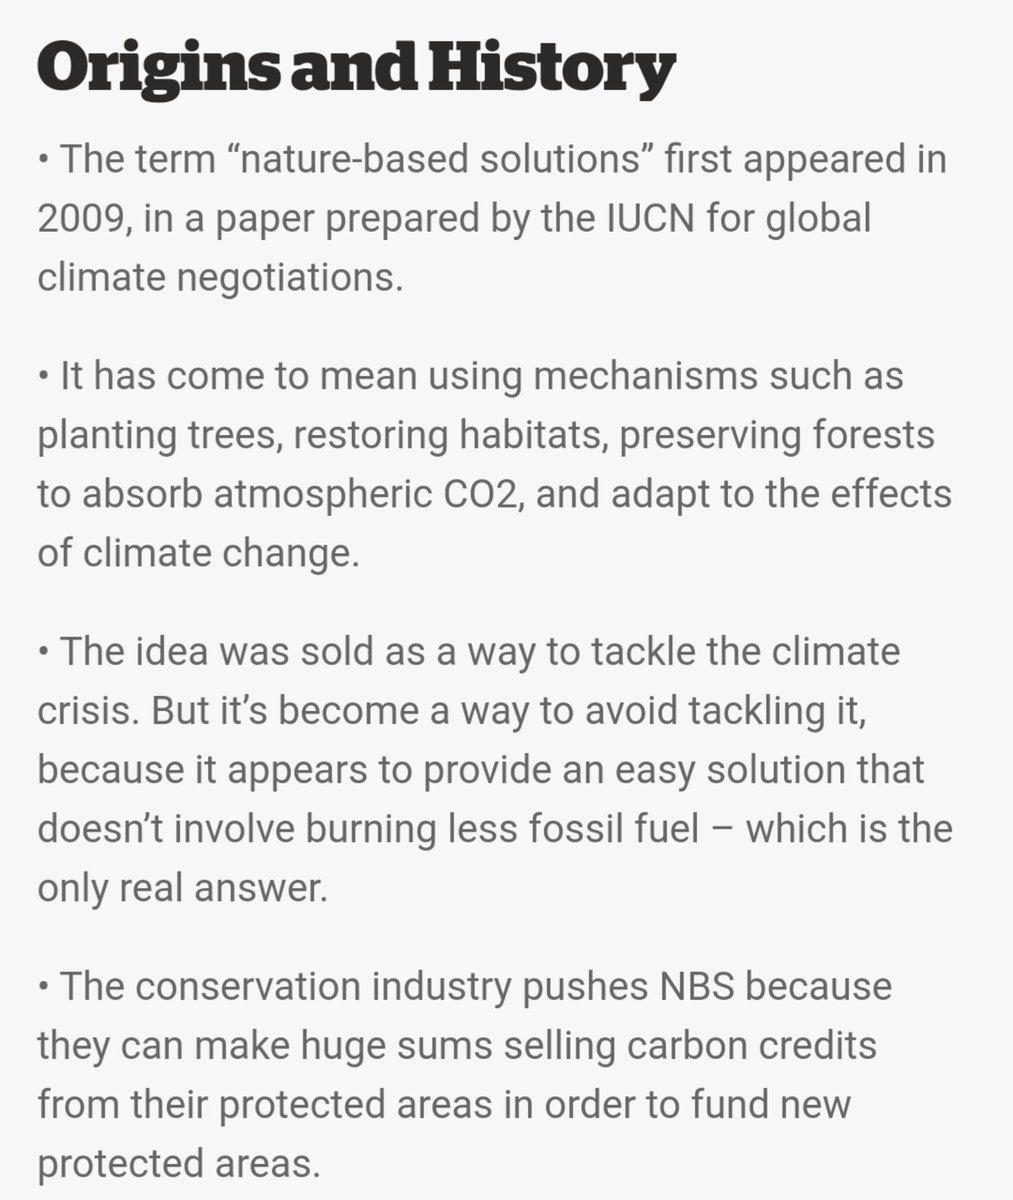 To understand more about #NatureBasedSolutions and why it is important to expose them, read this article.

📃survivalinternational.org/articles/NBS-g…